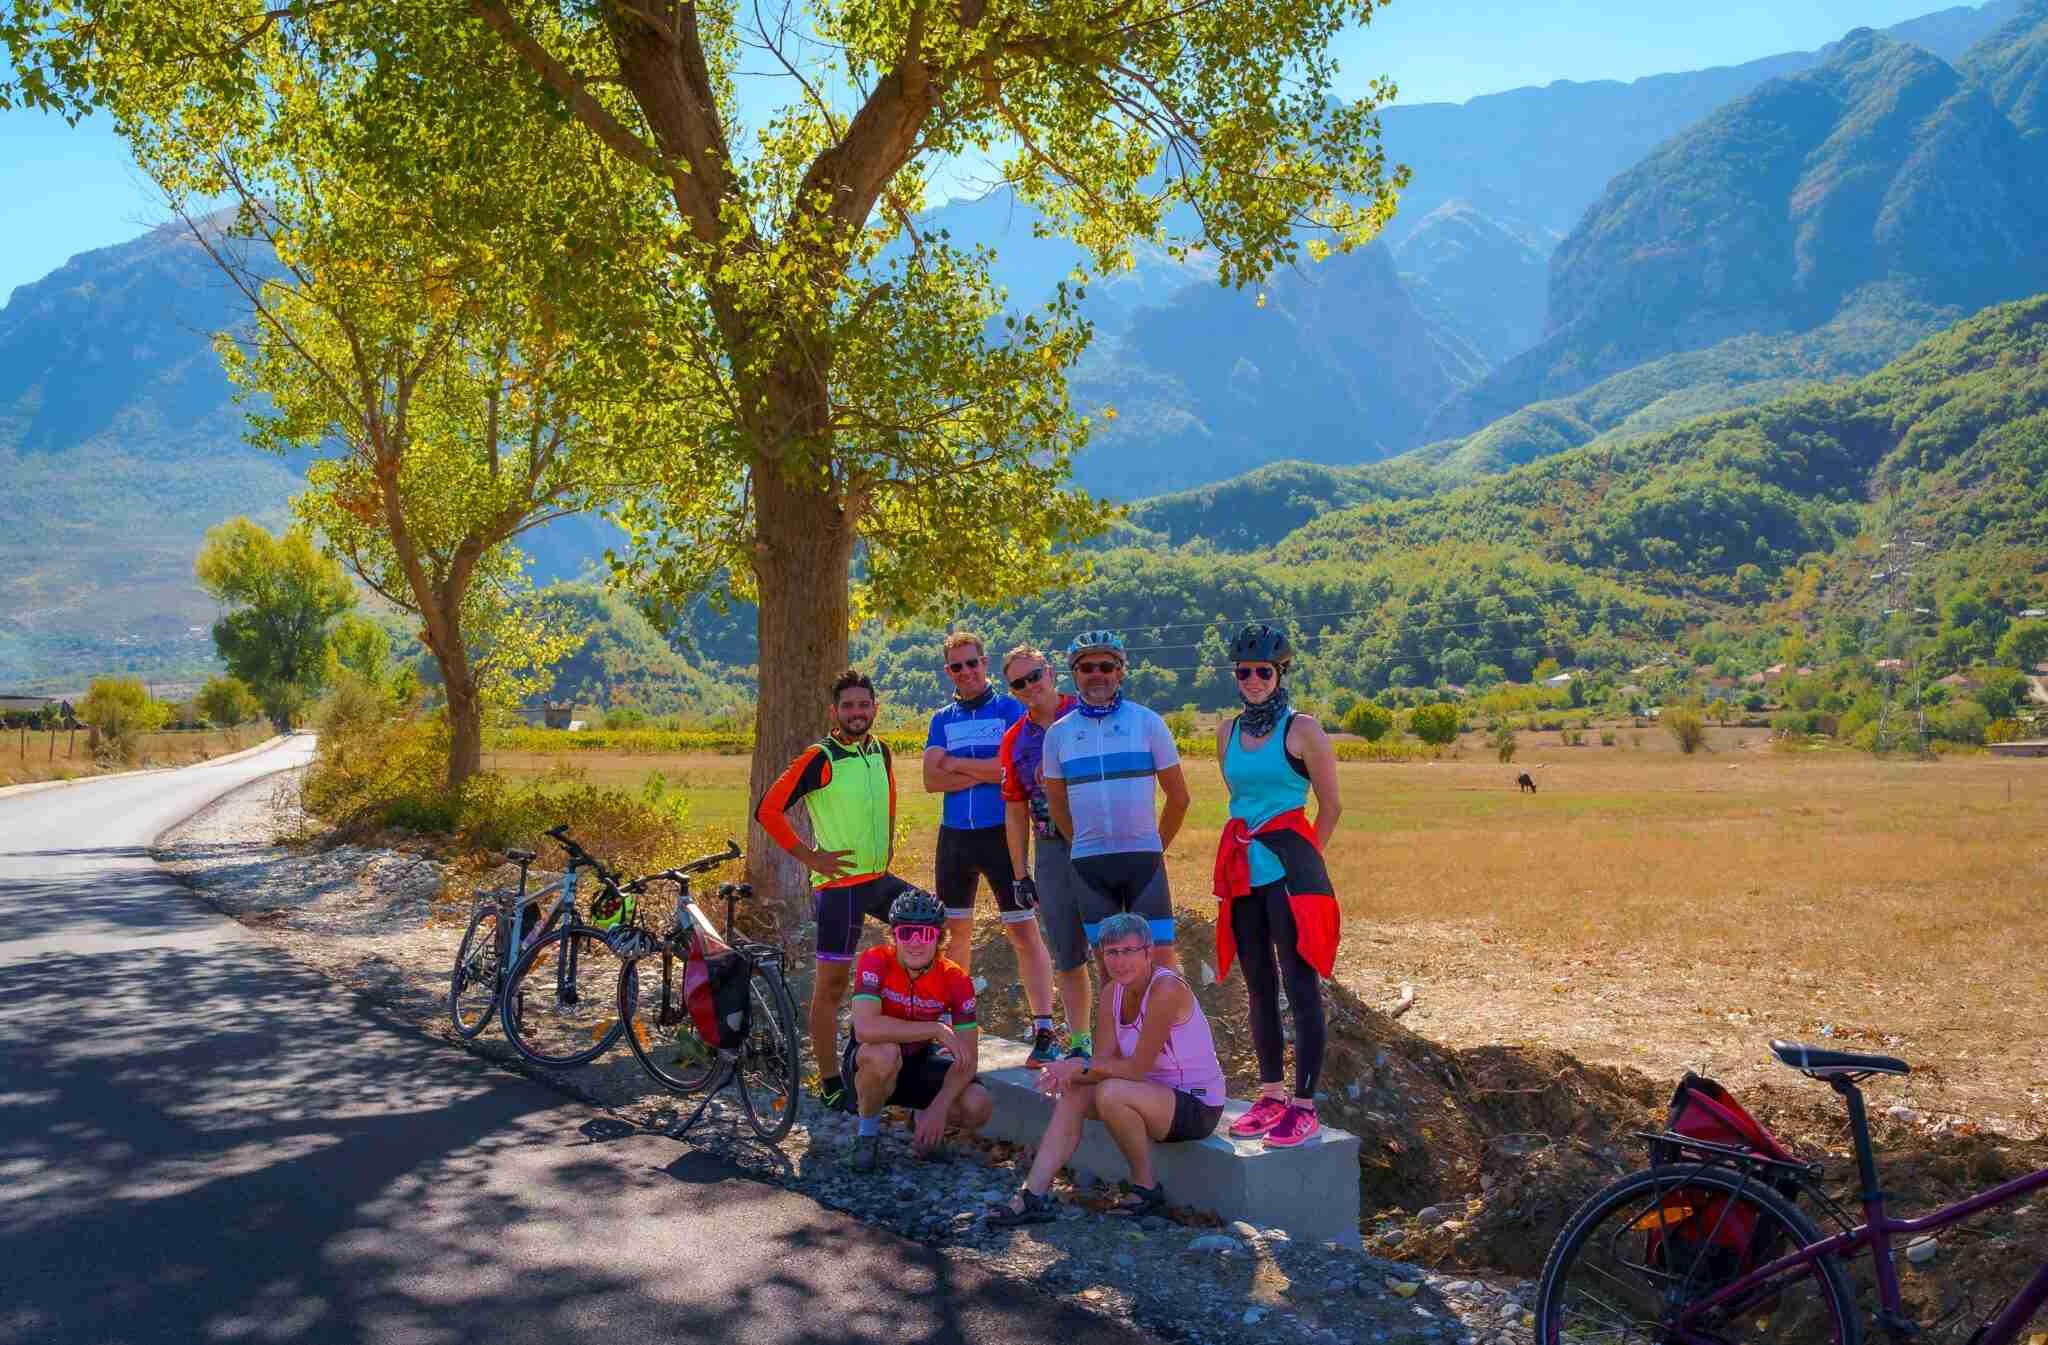 tourhub | The Natural Adventure | Cycling the UNESCO Sites in Albania (Guided) 